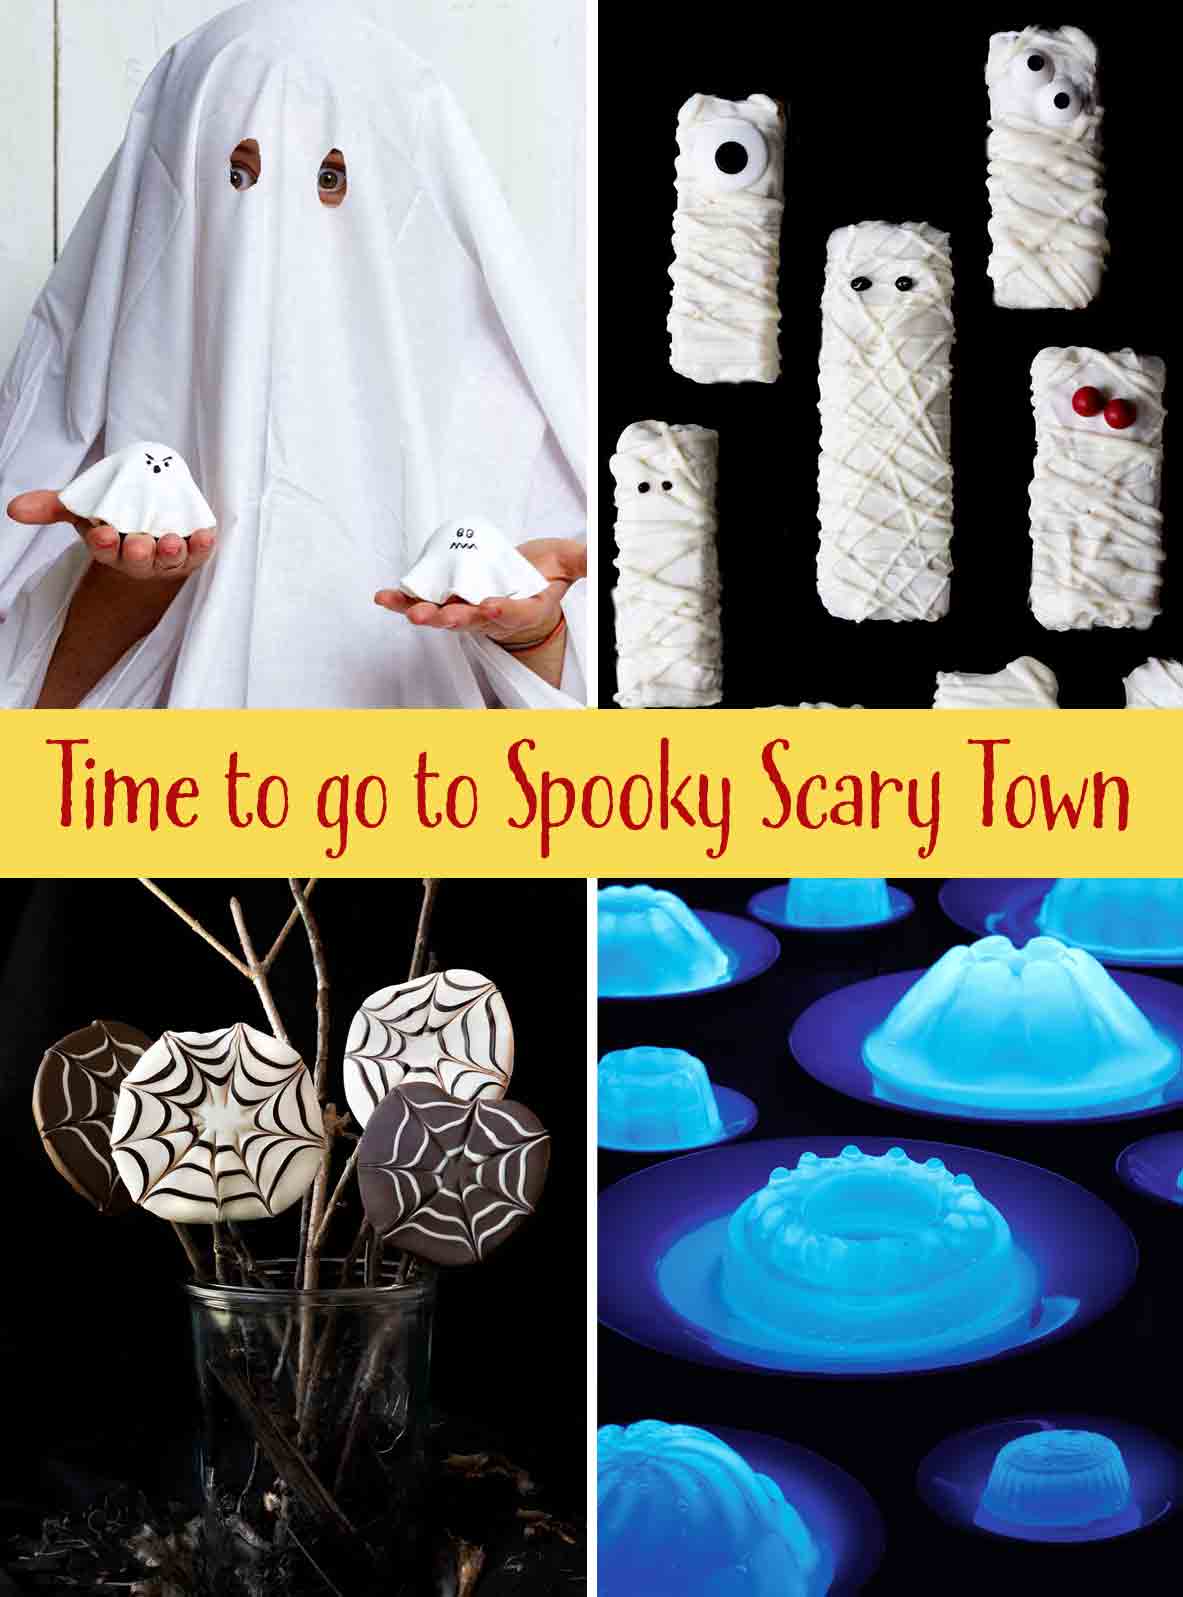 A child dressed as a ghost holding ghost cupcakes, several mummy Rice Krispies treats, a jar of spider web chocolate covered apples, and several plates of glow-in-the-dark jello.